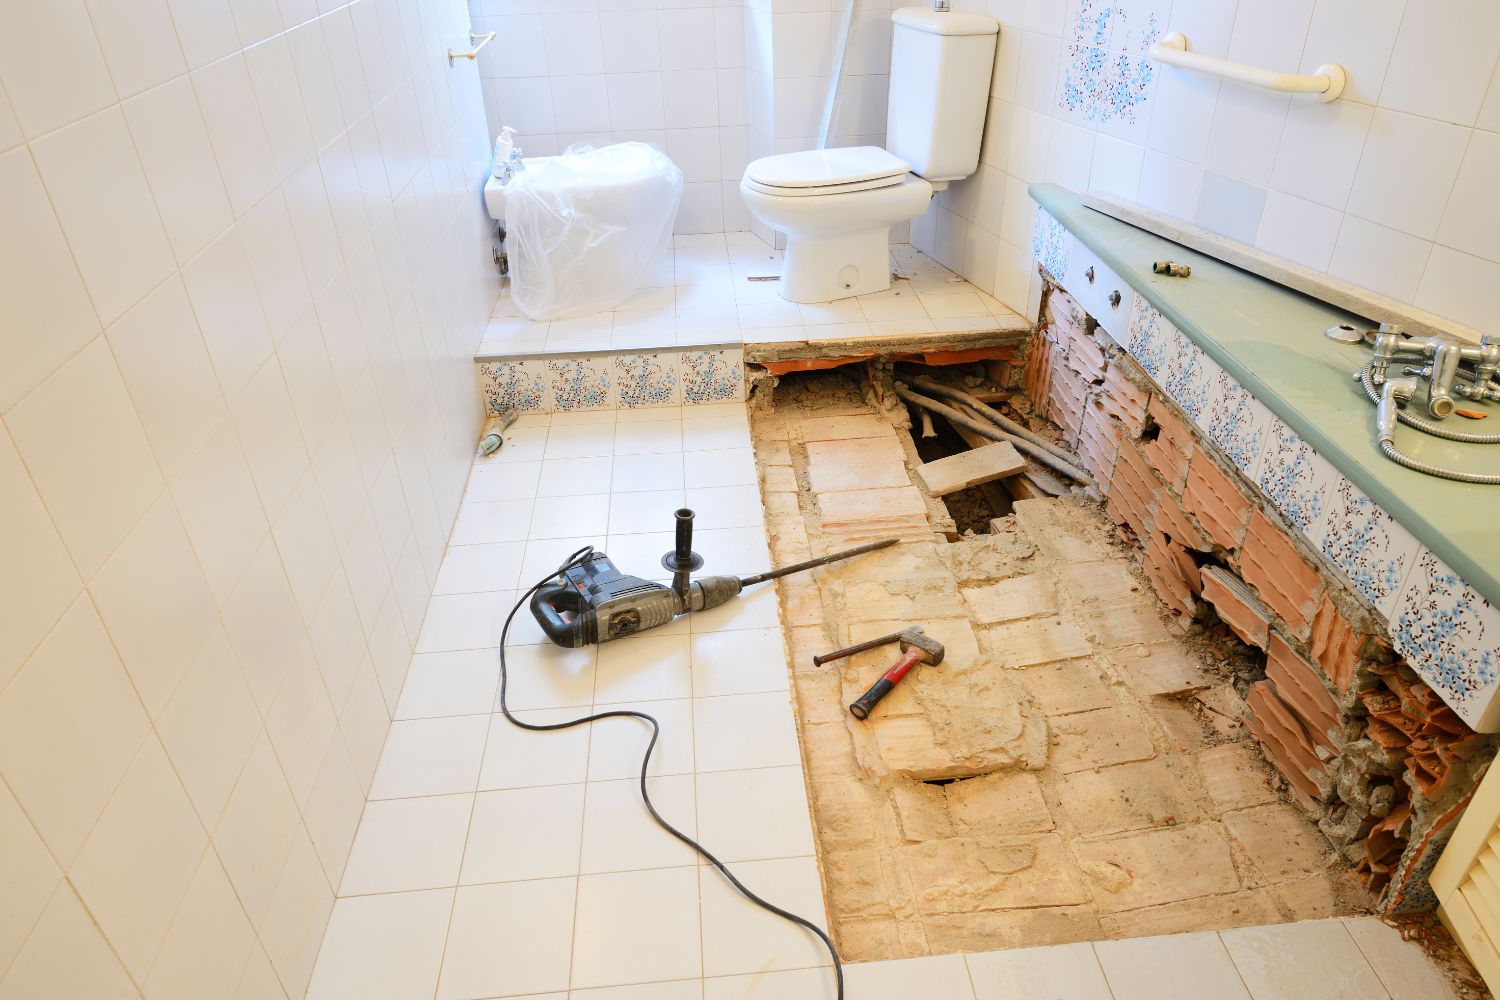 How To Prevent Water Damage In The Bathroom